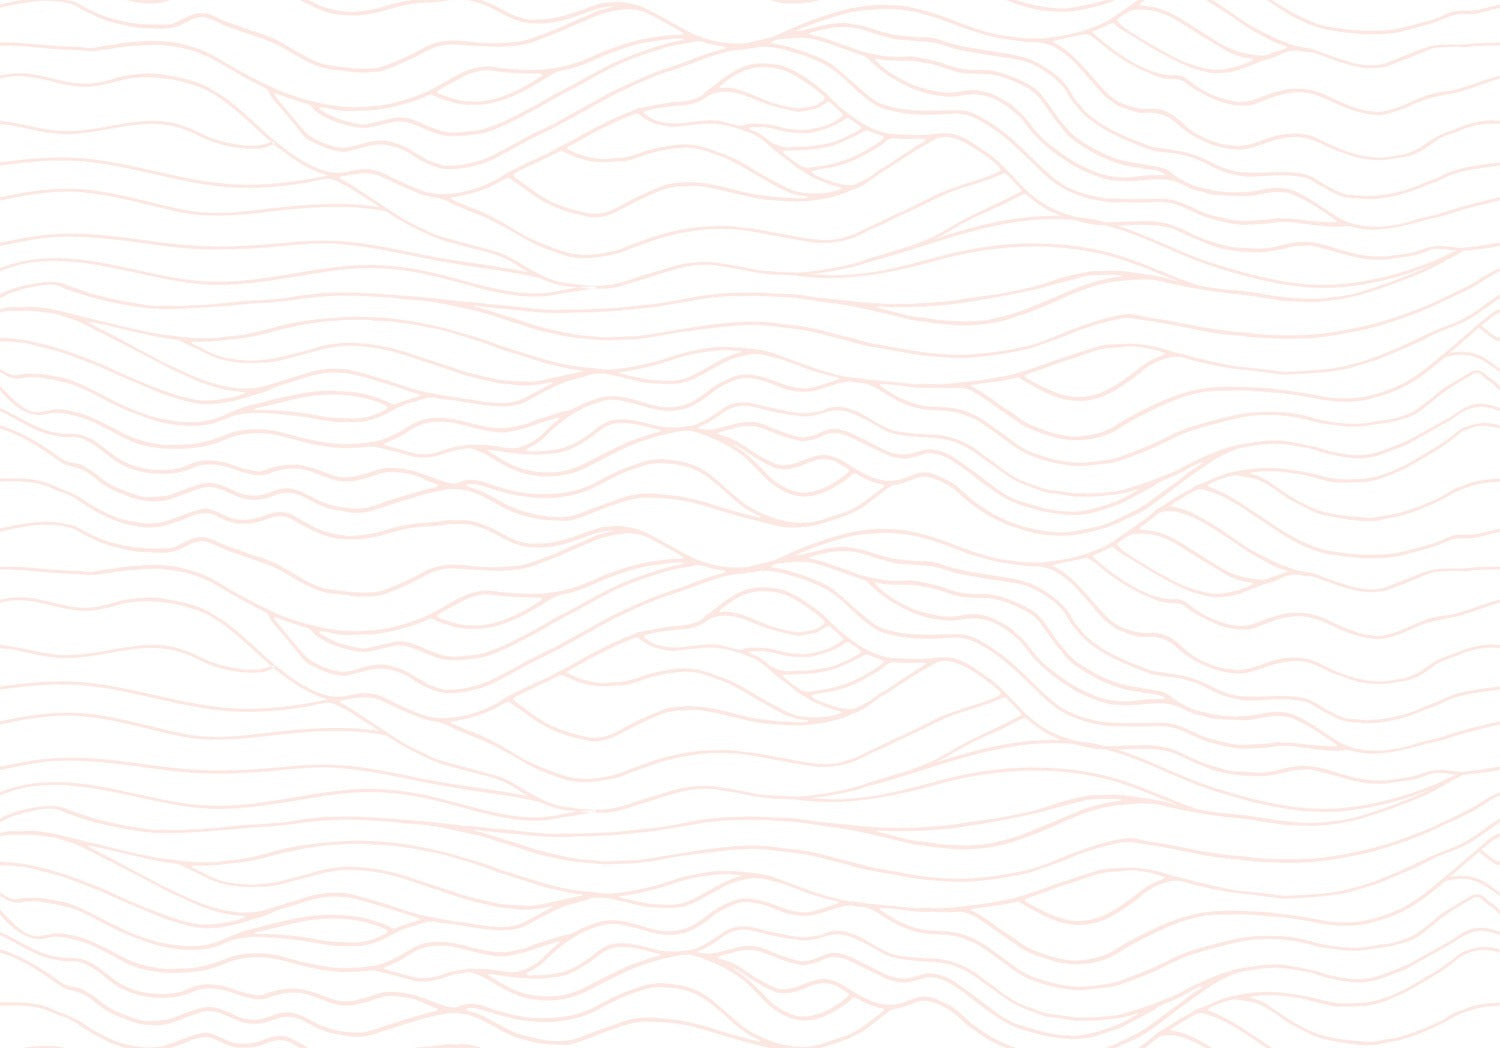 A seamless pattern of the Line Art Wave Wallpaper, showcasing gentle wavy lines in a soft pink hue that give the impression of serene waves, creating a calming and elegant texture on a white background.